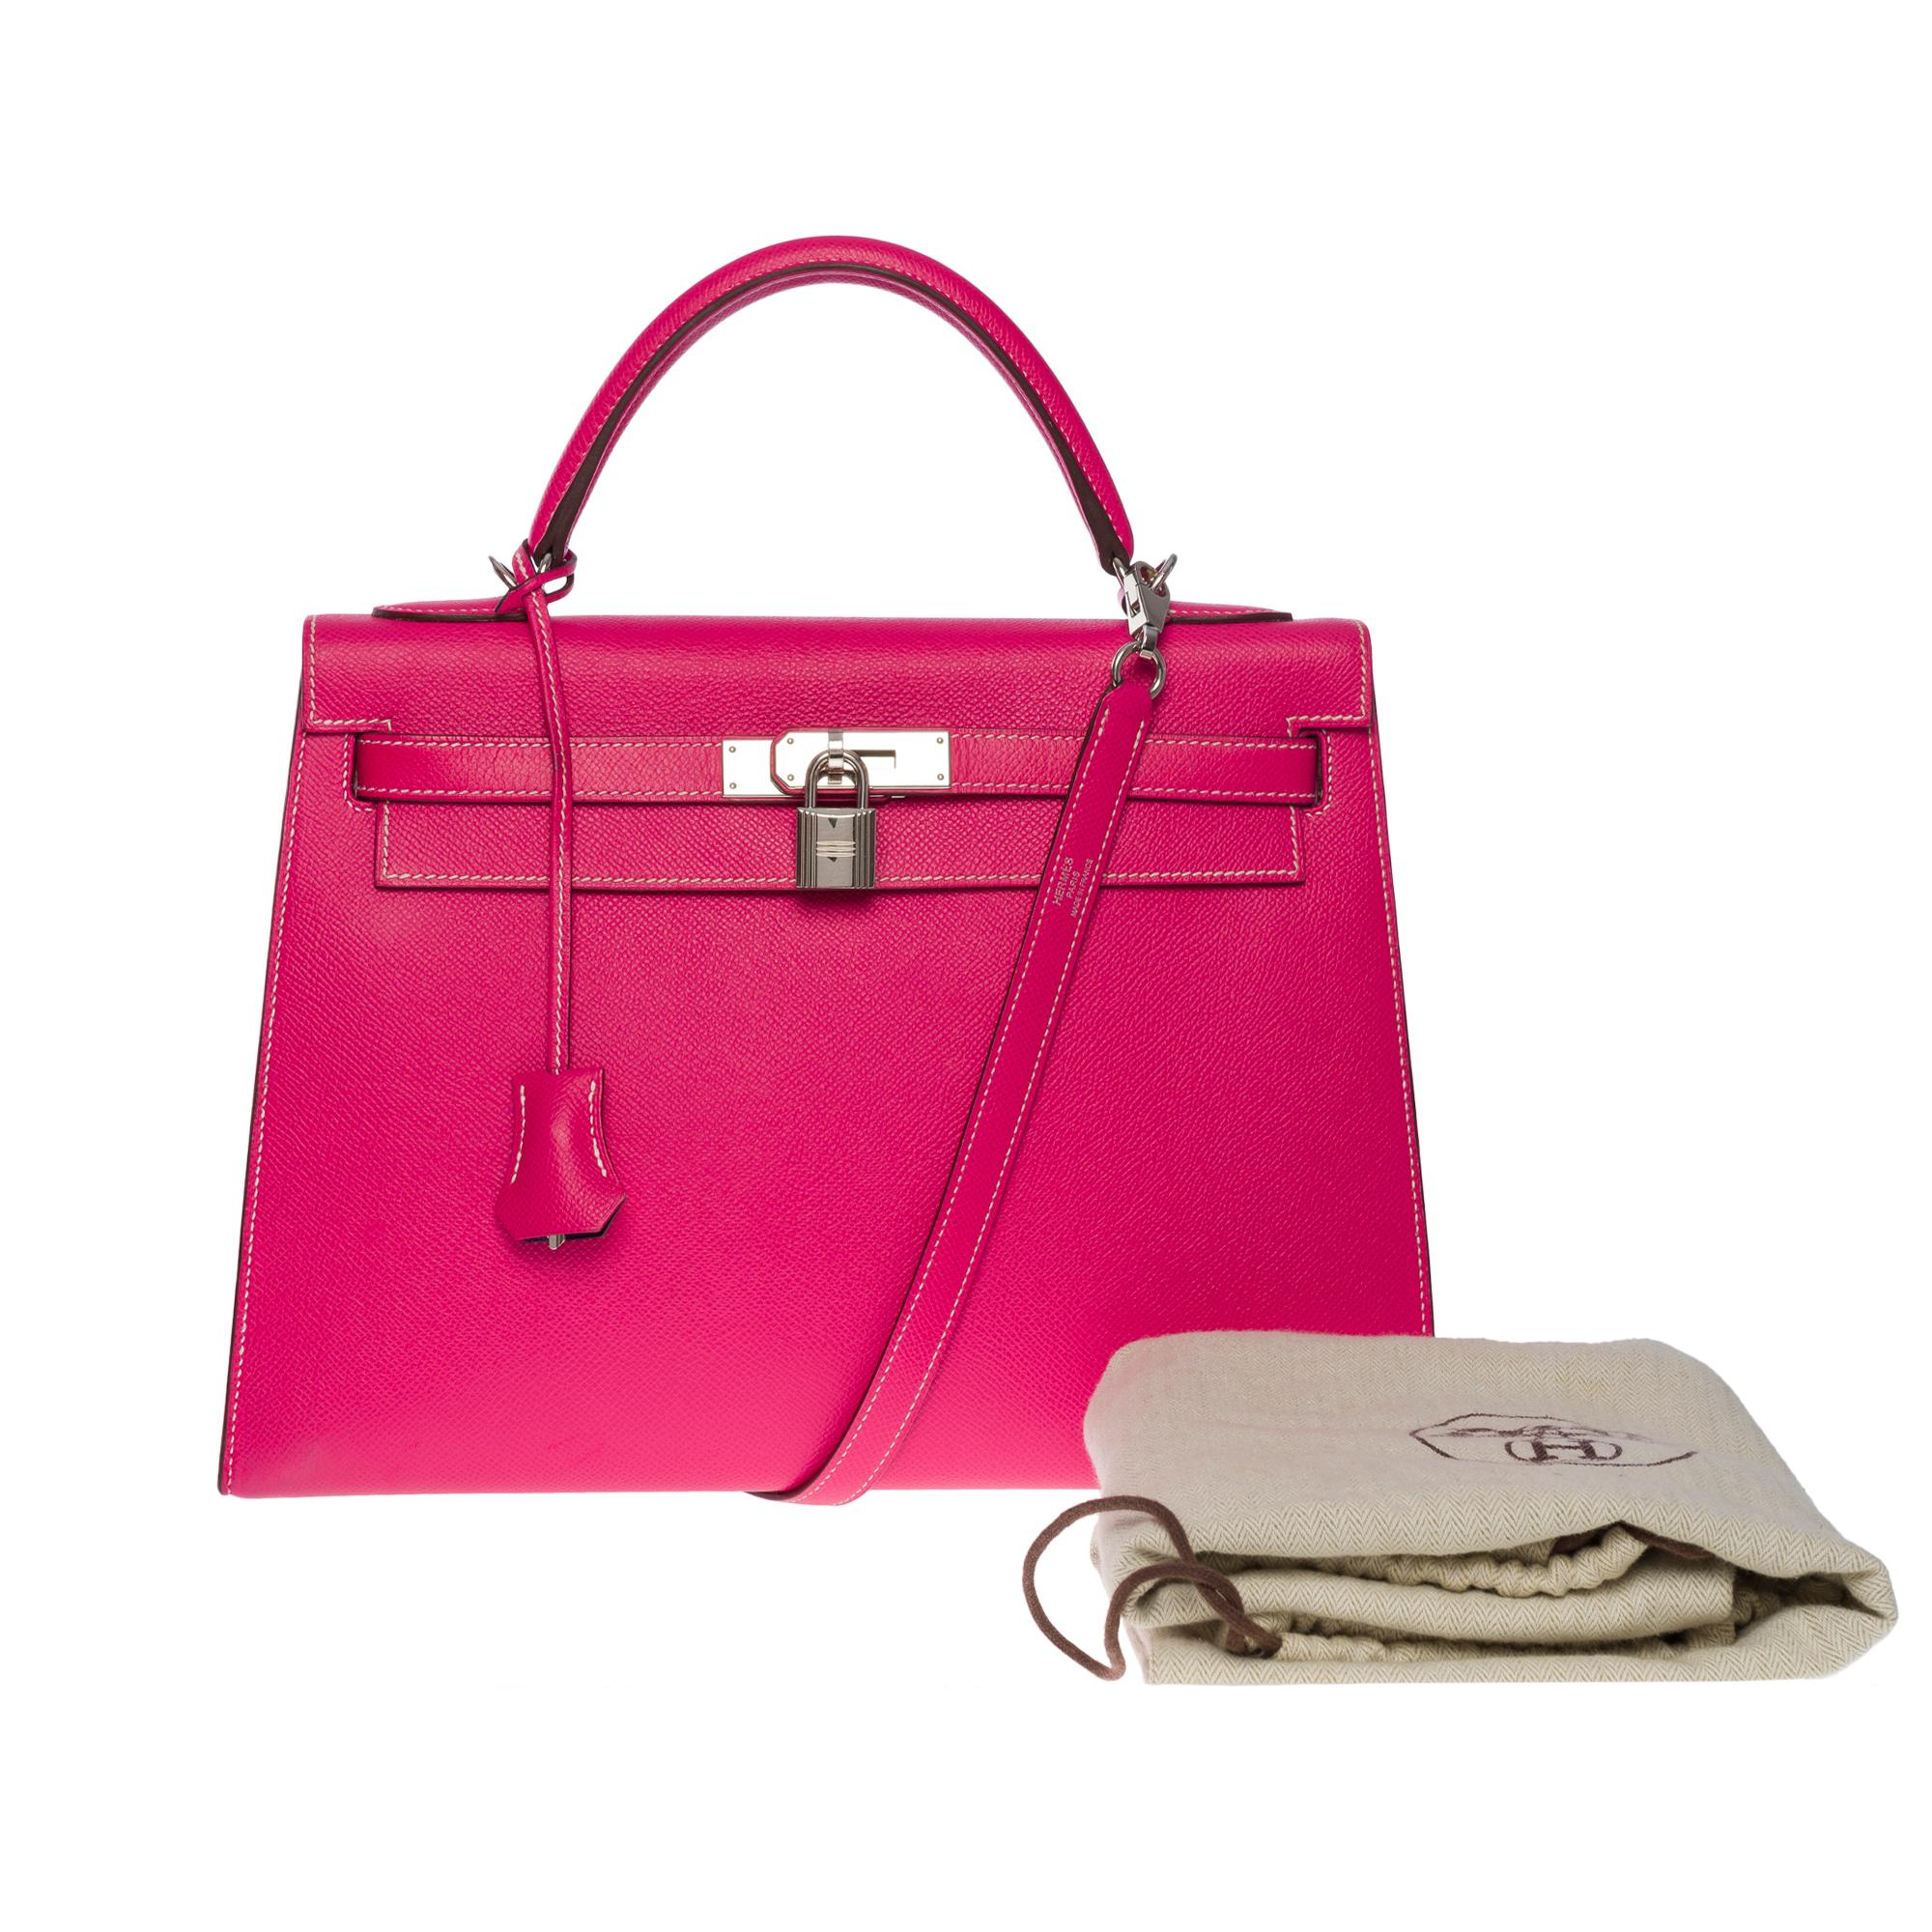 Special Order - Horse Shoe HSS

Exceptional & Unique Hermes Kelly 32 sellier handbag (Special Order - Horse Shoe HSS) in Rose Tyrien epsom leather & Interior Purple, Palladium silver metal hardware, Pink leather handle, removable shoulder strap in